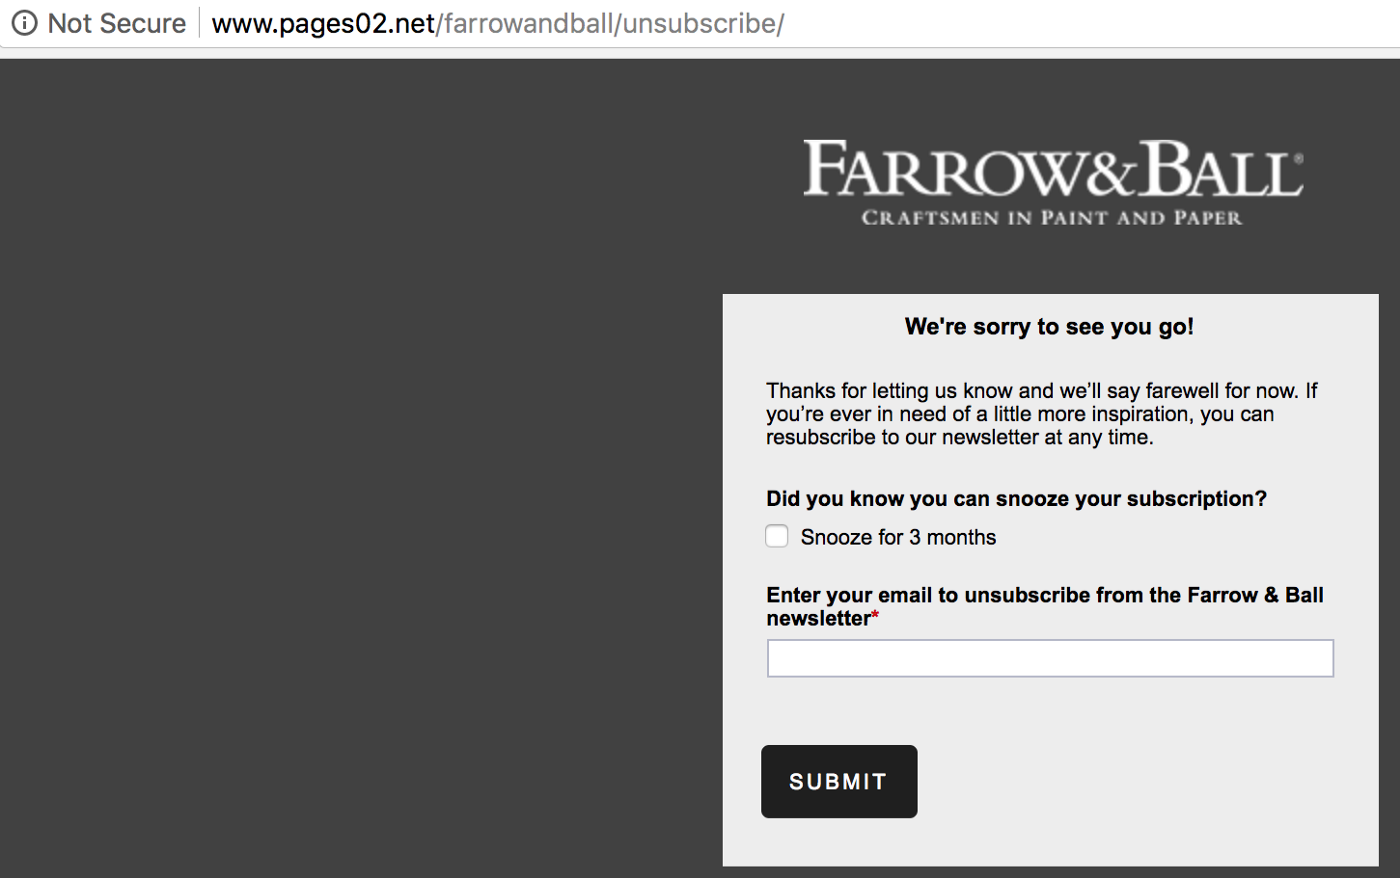 A landing page asking to enter email address to unsubscribe and a warning that the page is not secure.